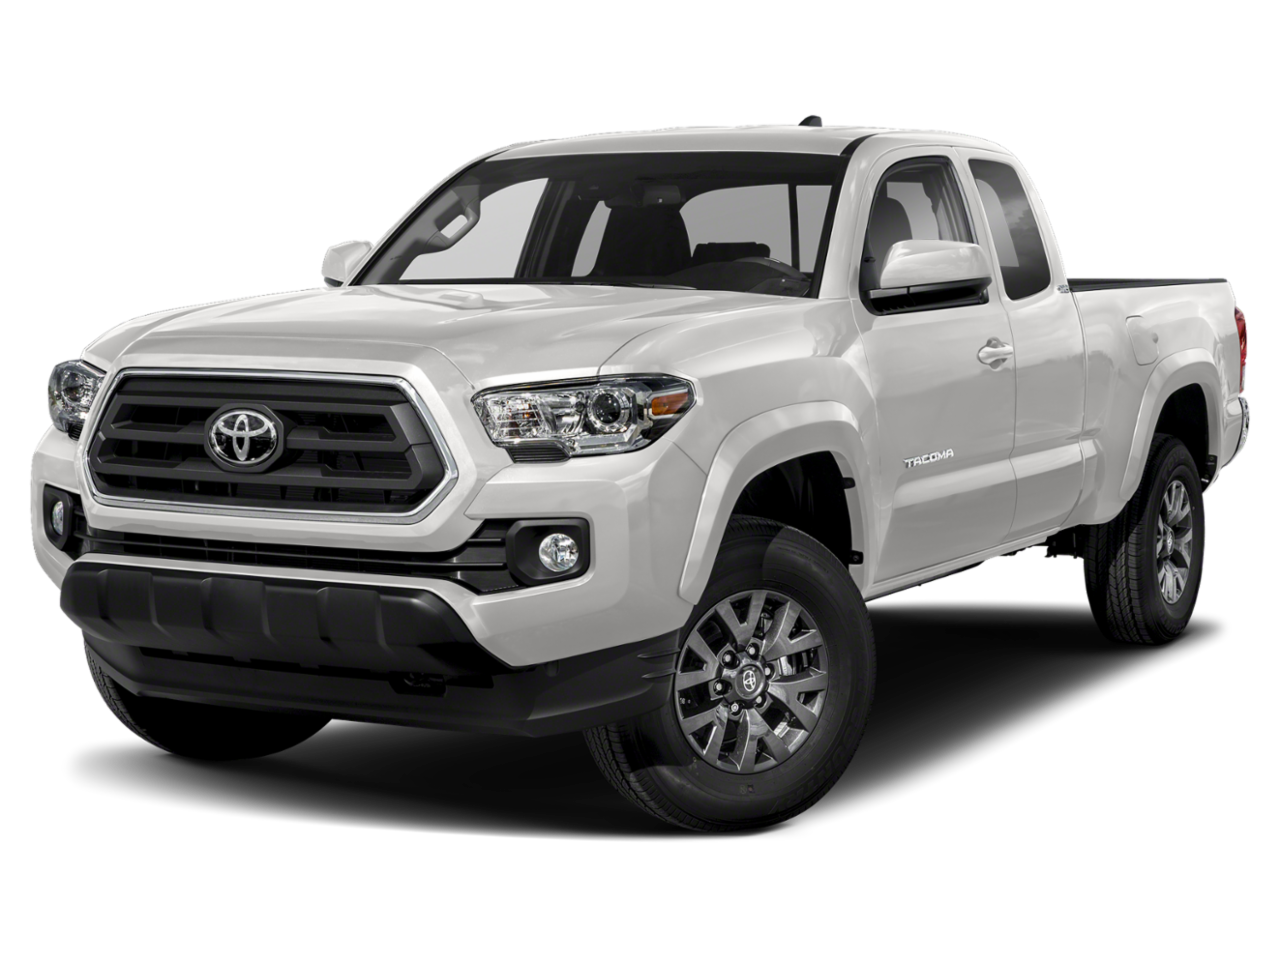 New Toyota Tacoma 4wd From Your North Aurora Il Dealership Gerald